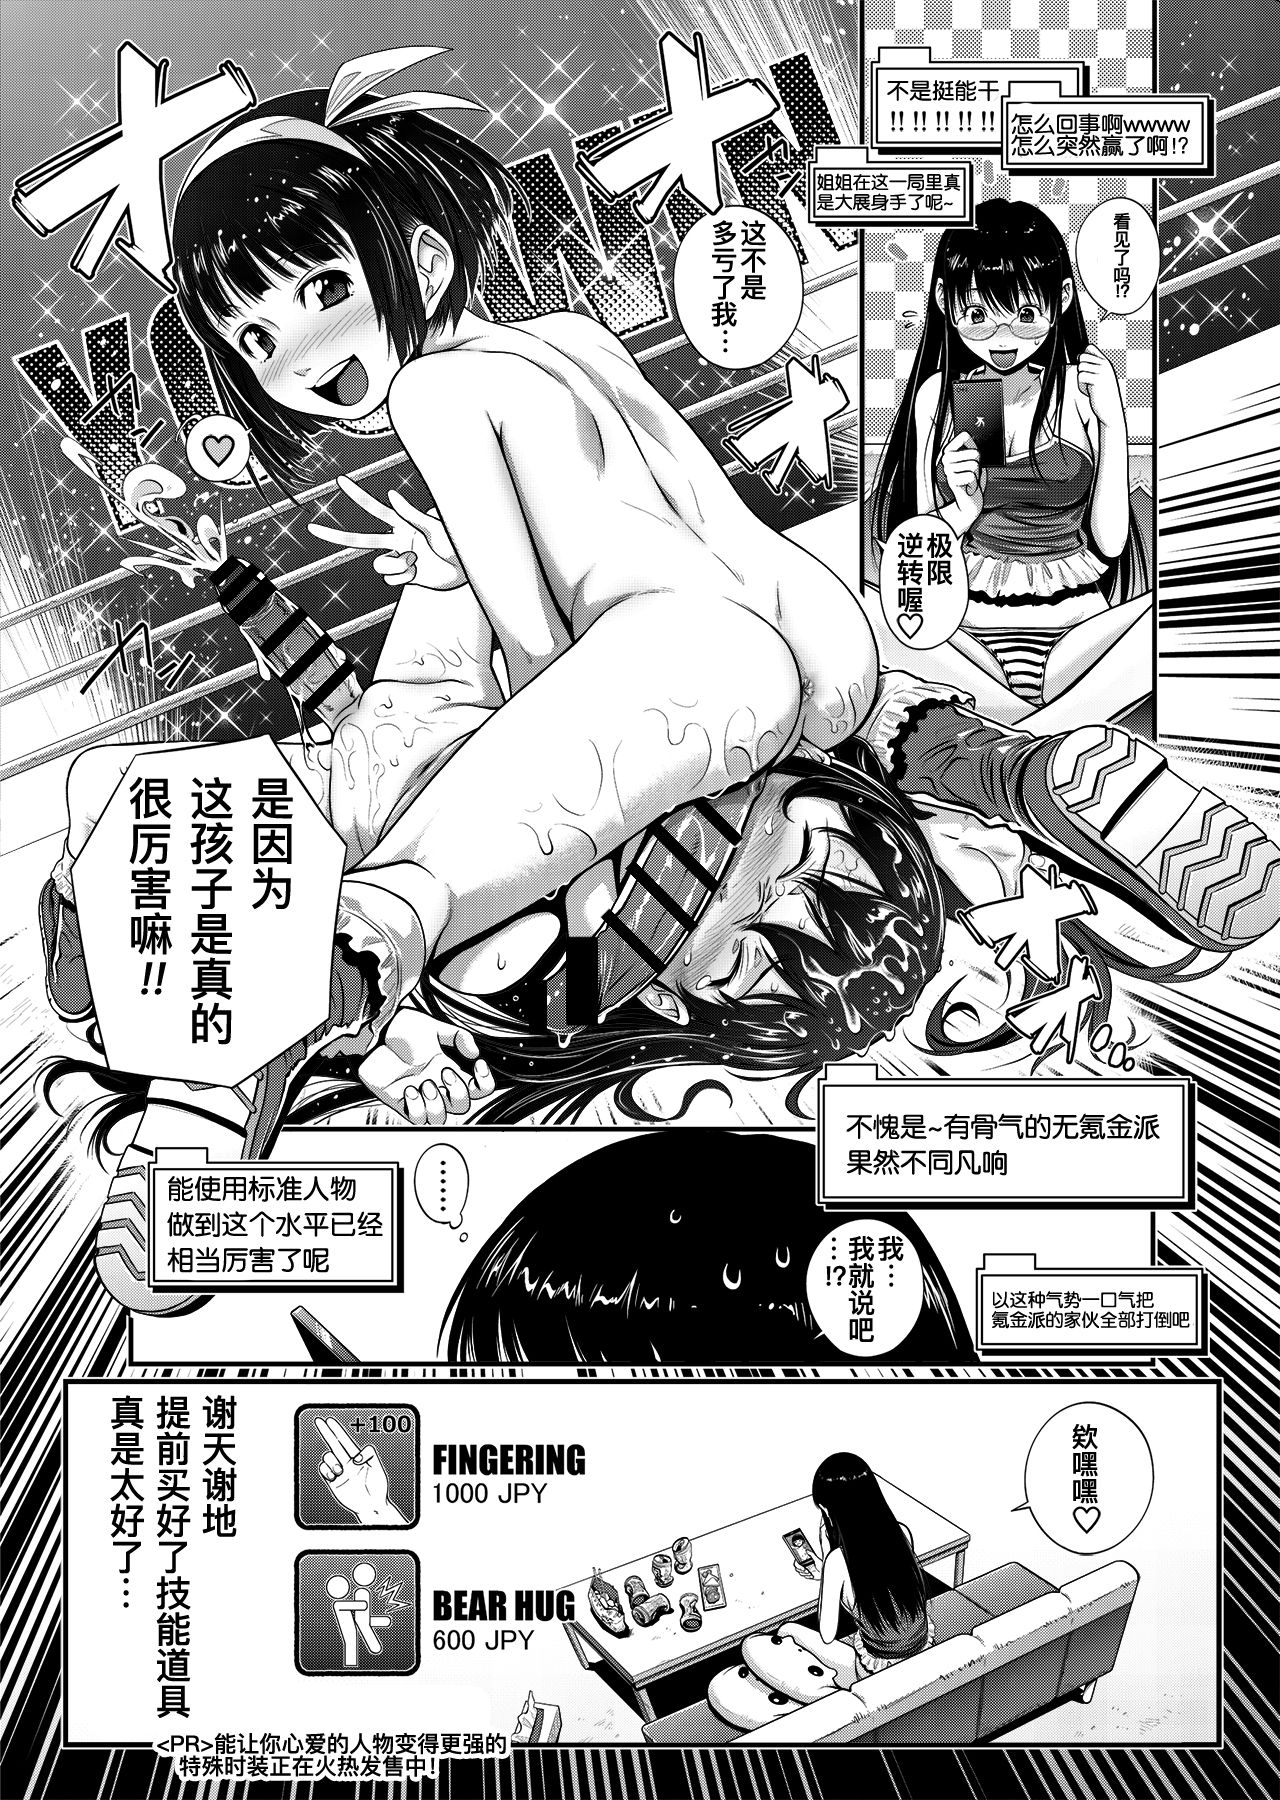 [remora works (CHIPOKAN)] FUTACOLO CO -NO CHARGING- [Chinese] [靴下汉化组] [Digital] page 23 full